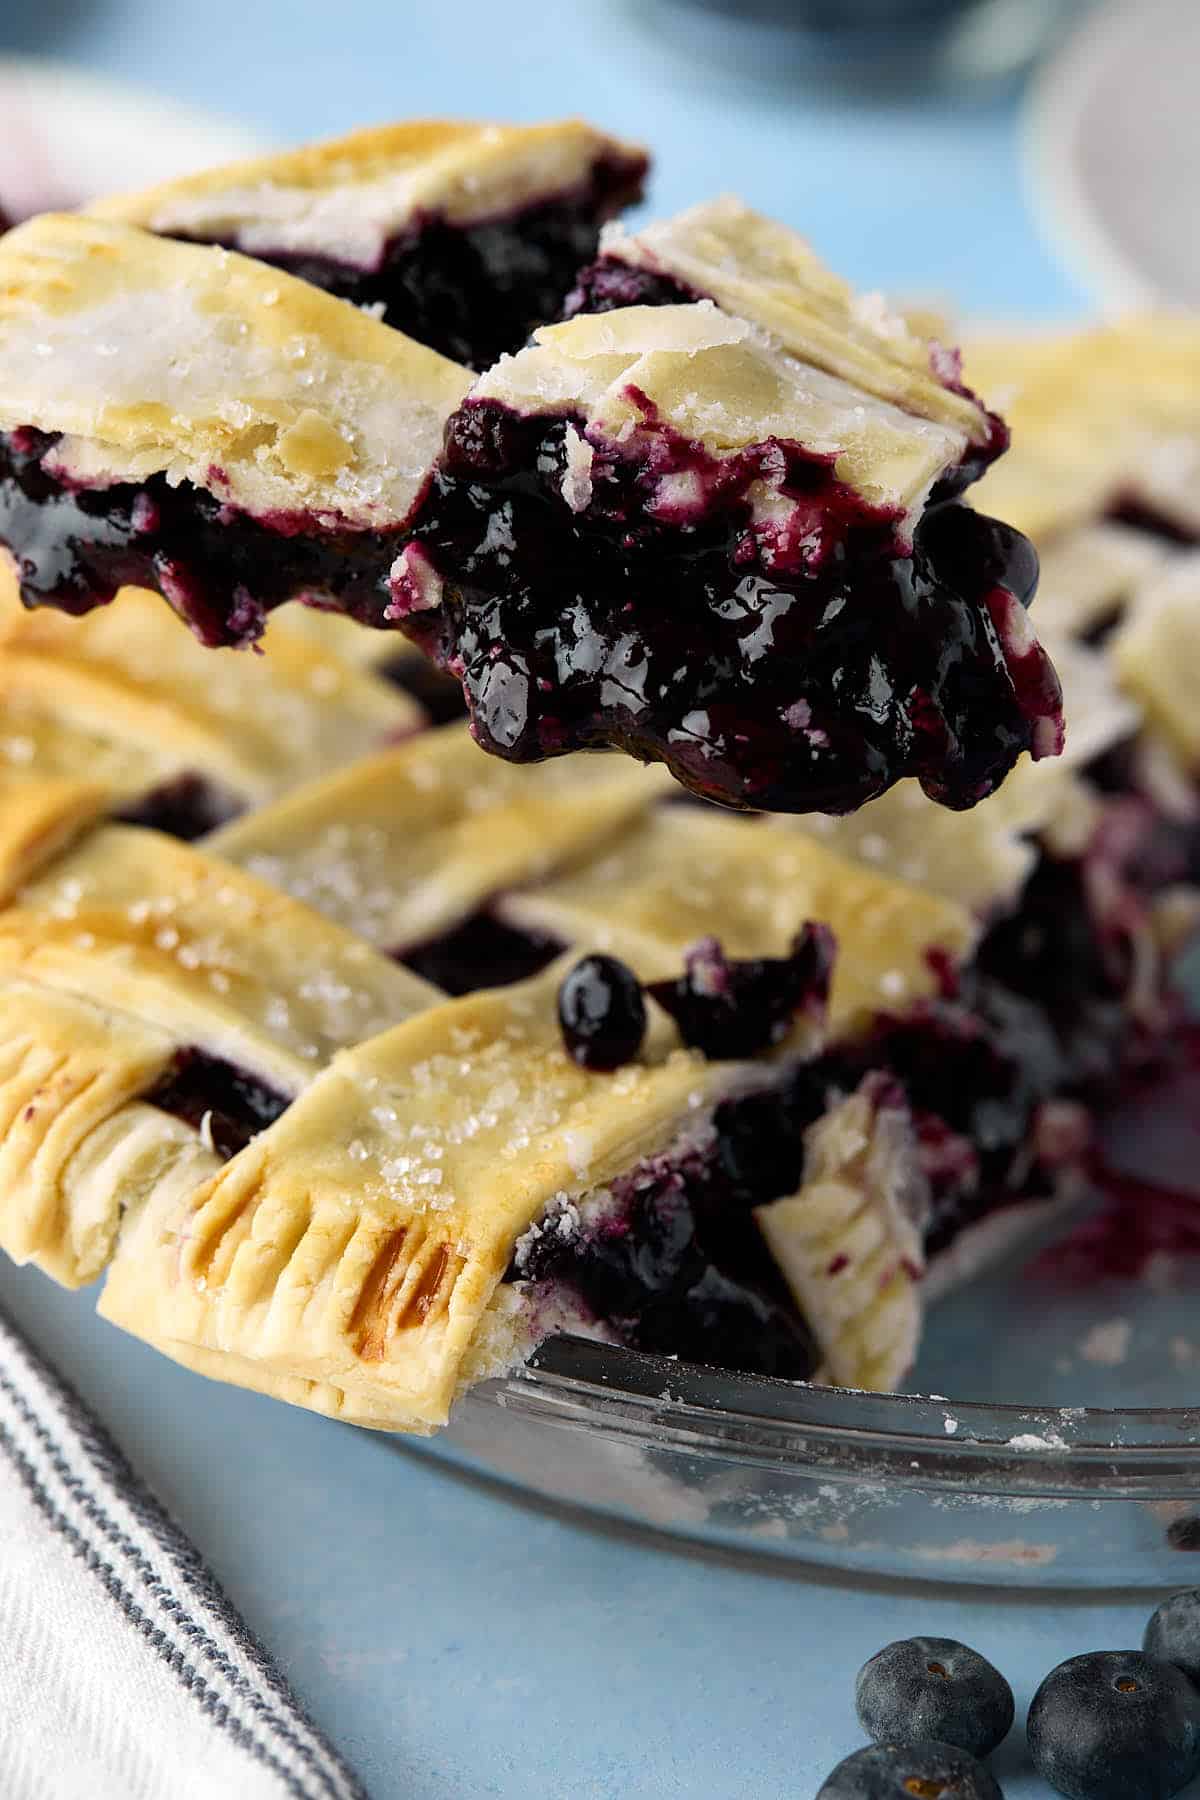 A blueberry pie slice being lifted from the pie tin.